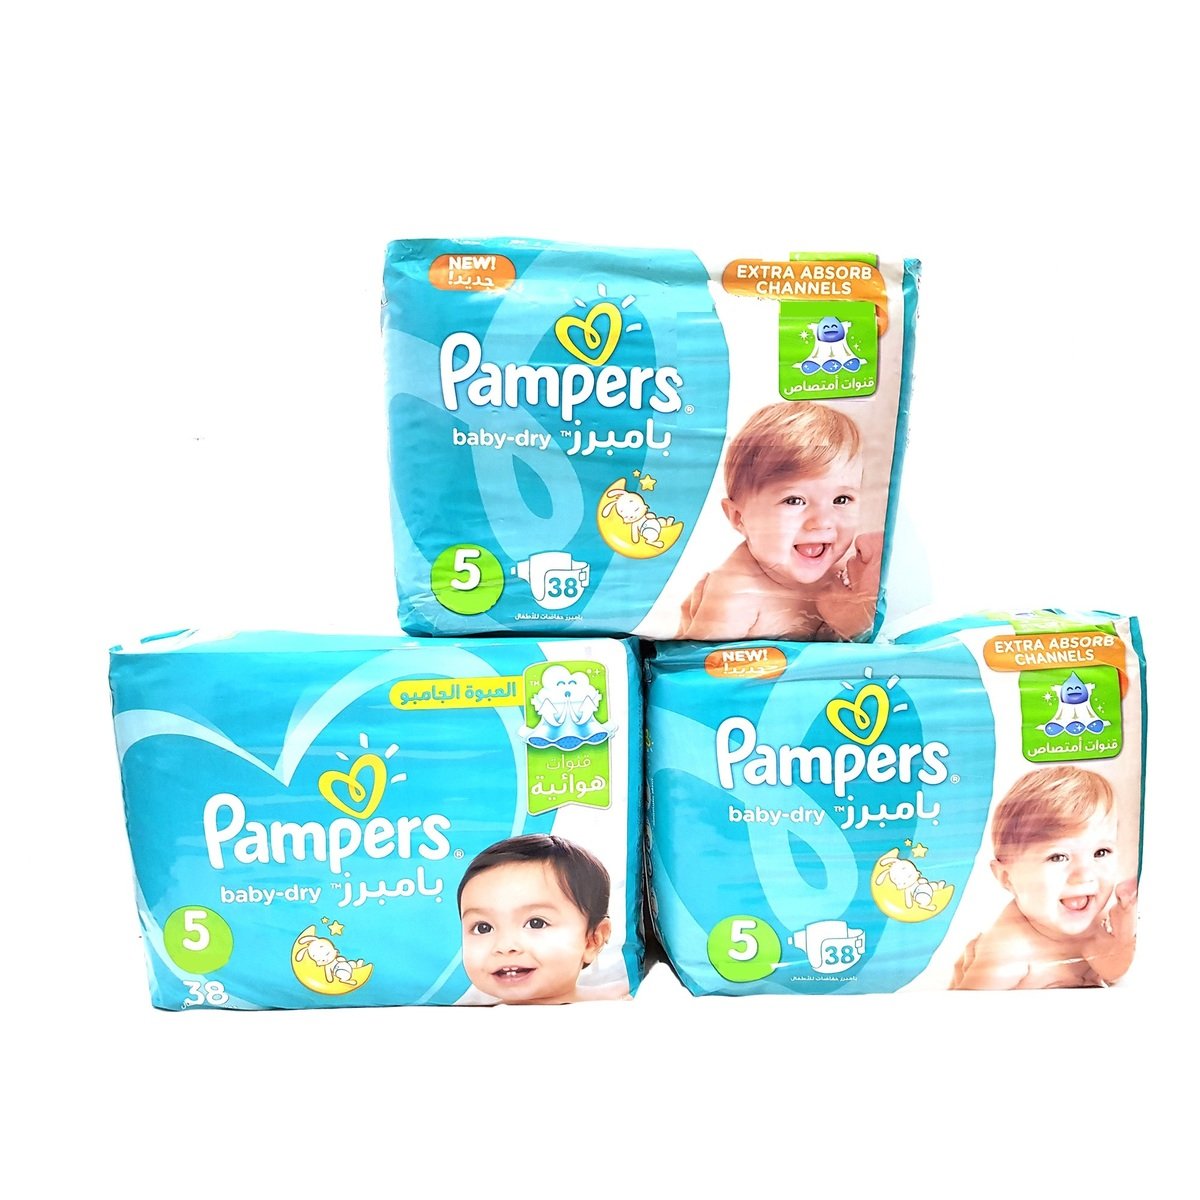 Pampers Active Baby Dry Diapers Size 5, 11-16kg 3 x 38pcs